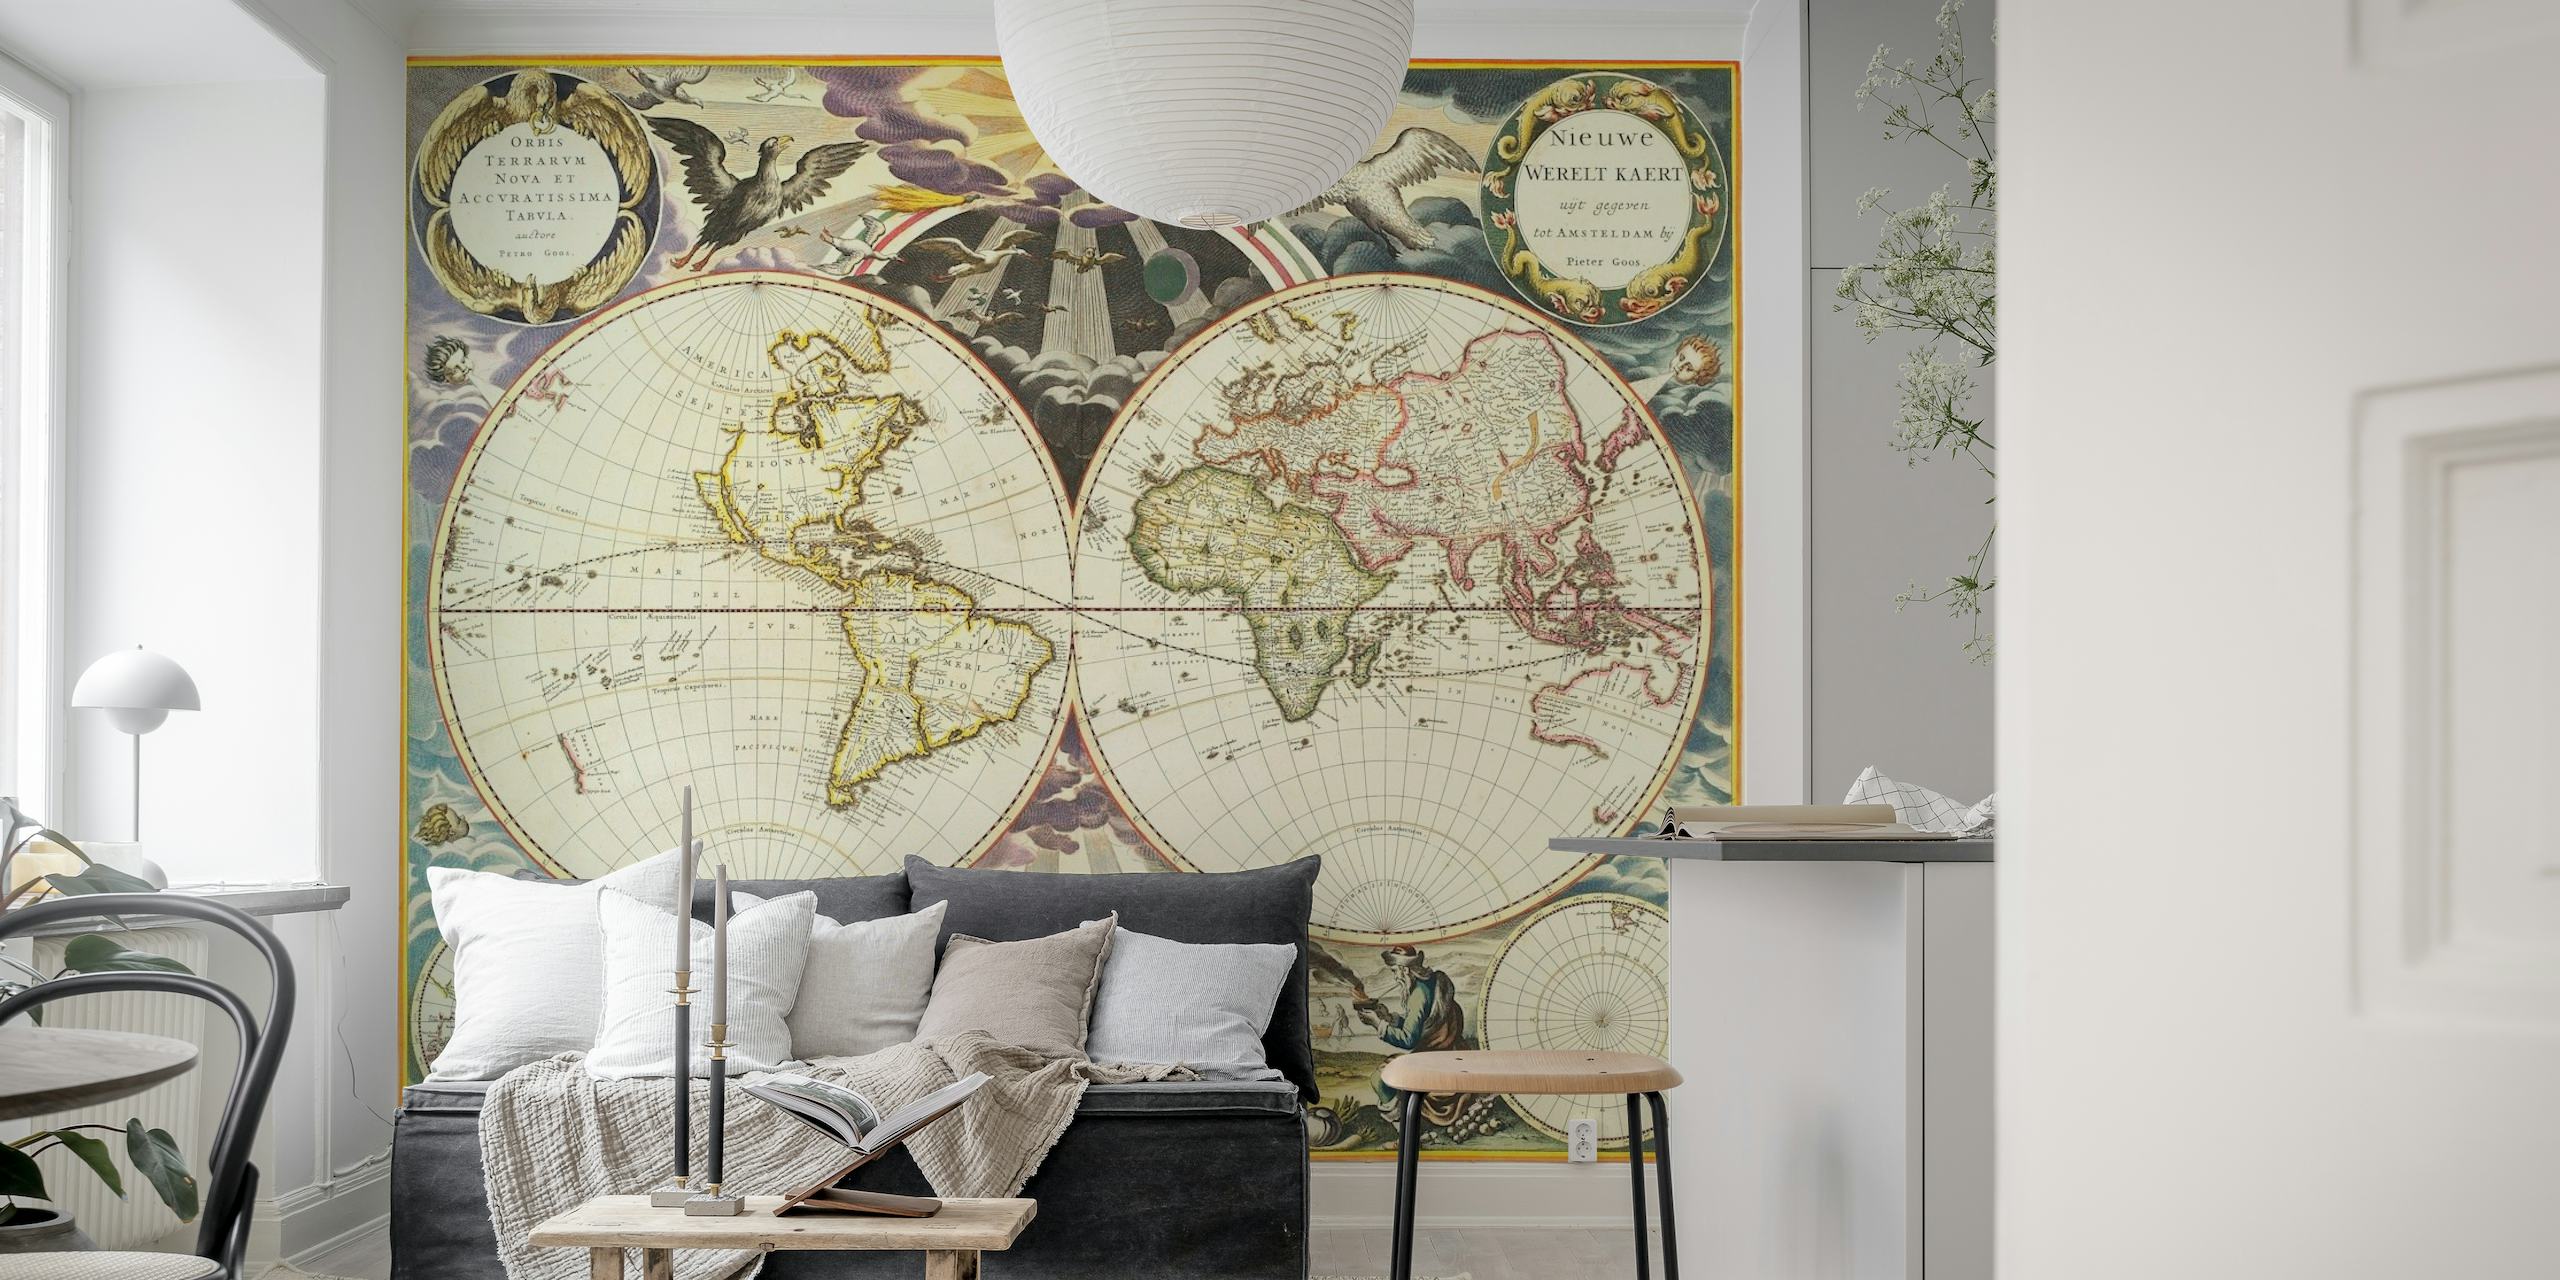 Antique World Map wall mural with vintage dual hemisphere design and decorative elements